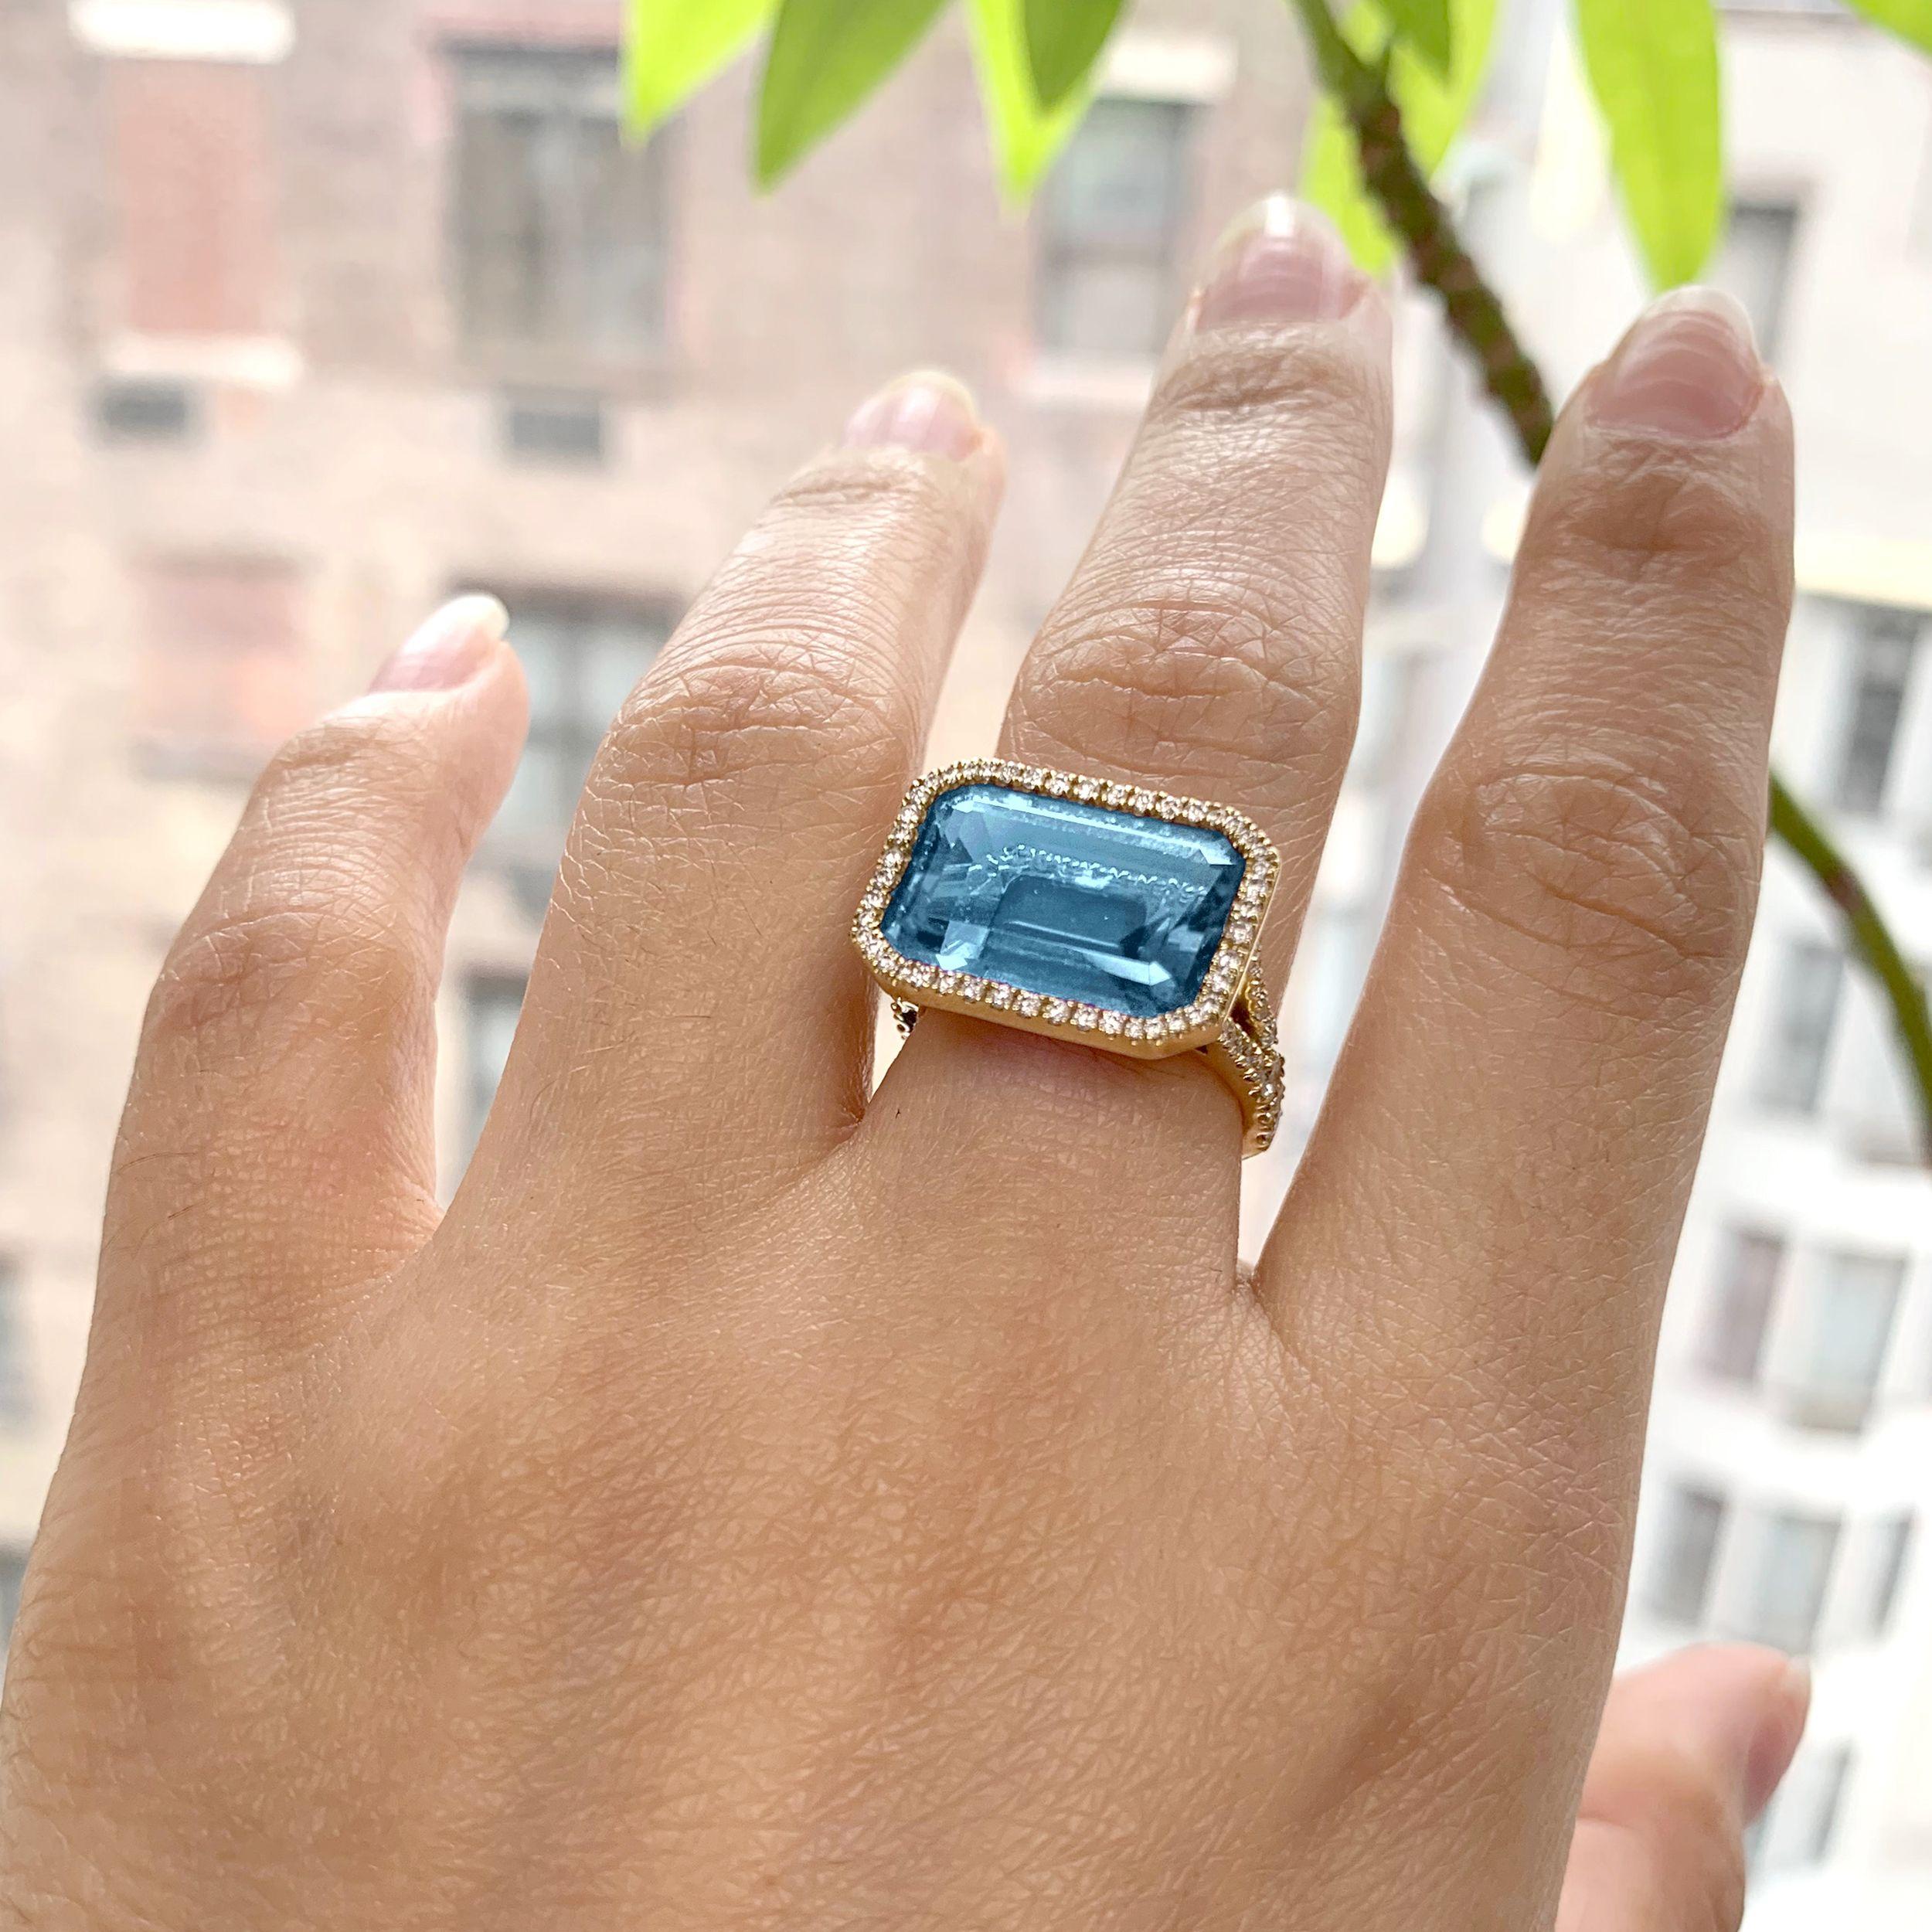 Blue Topaz East-West Emerald Cut Ring With Diamonds in 18K Yellow Gold, From 'Gossip' Collection

Stone Size: 10 x 15 mm

Gemstone Approx Wt: Blue Topaz- 9.70 Carats

Diamonds: G-H / VS, Approx Wt: 0.78 Carats 